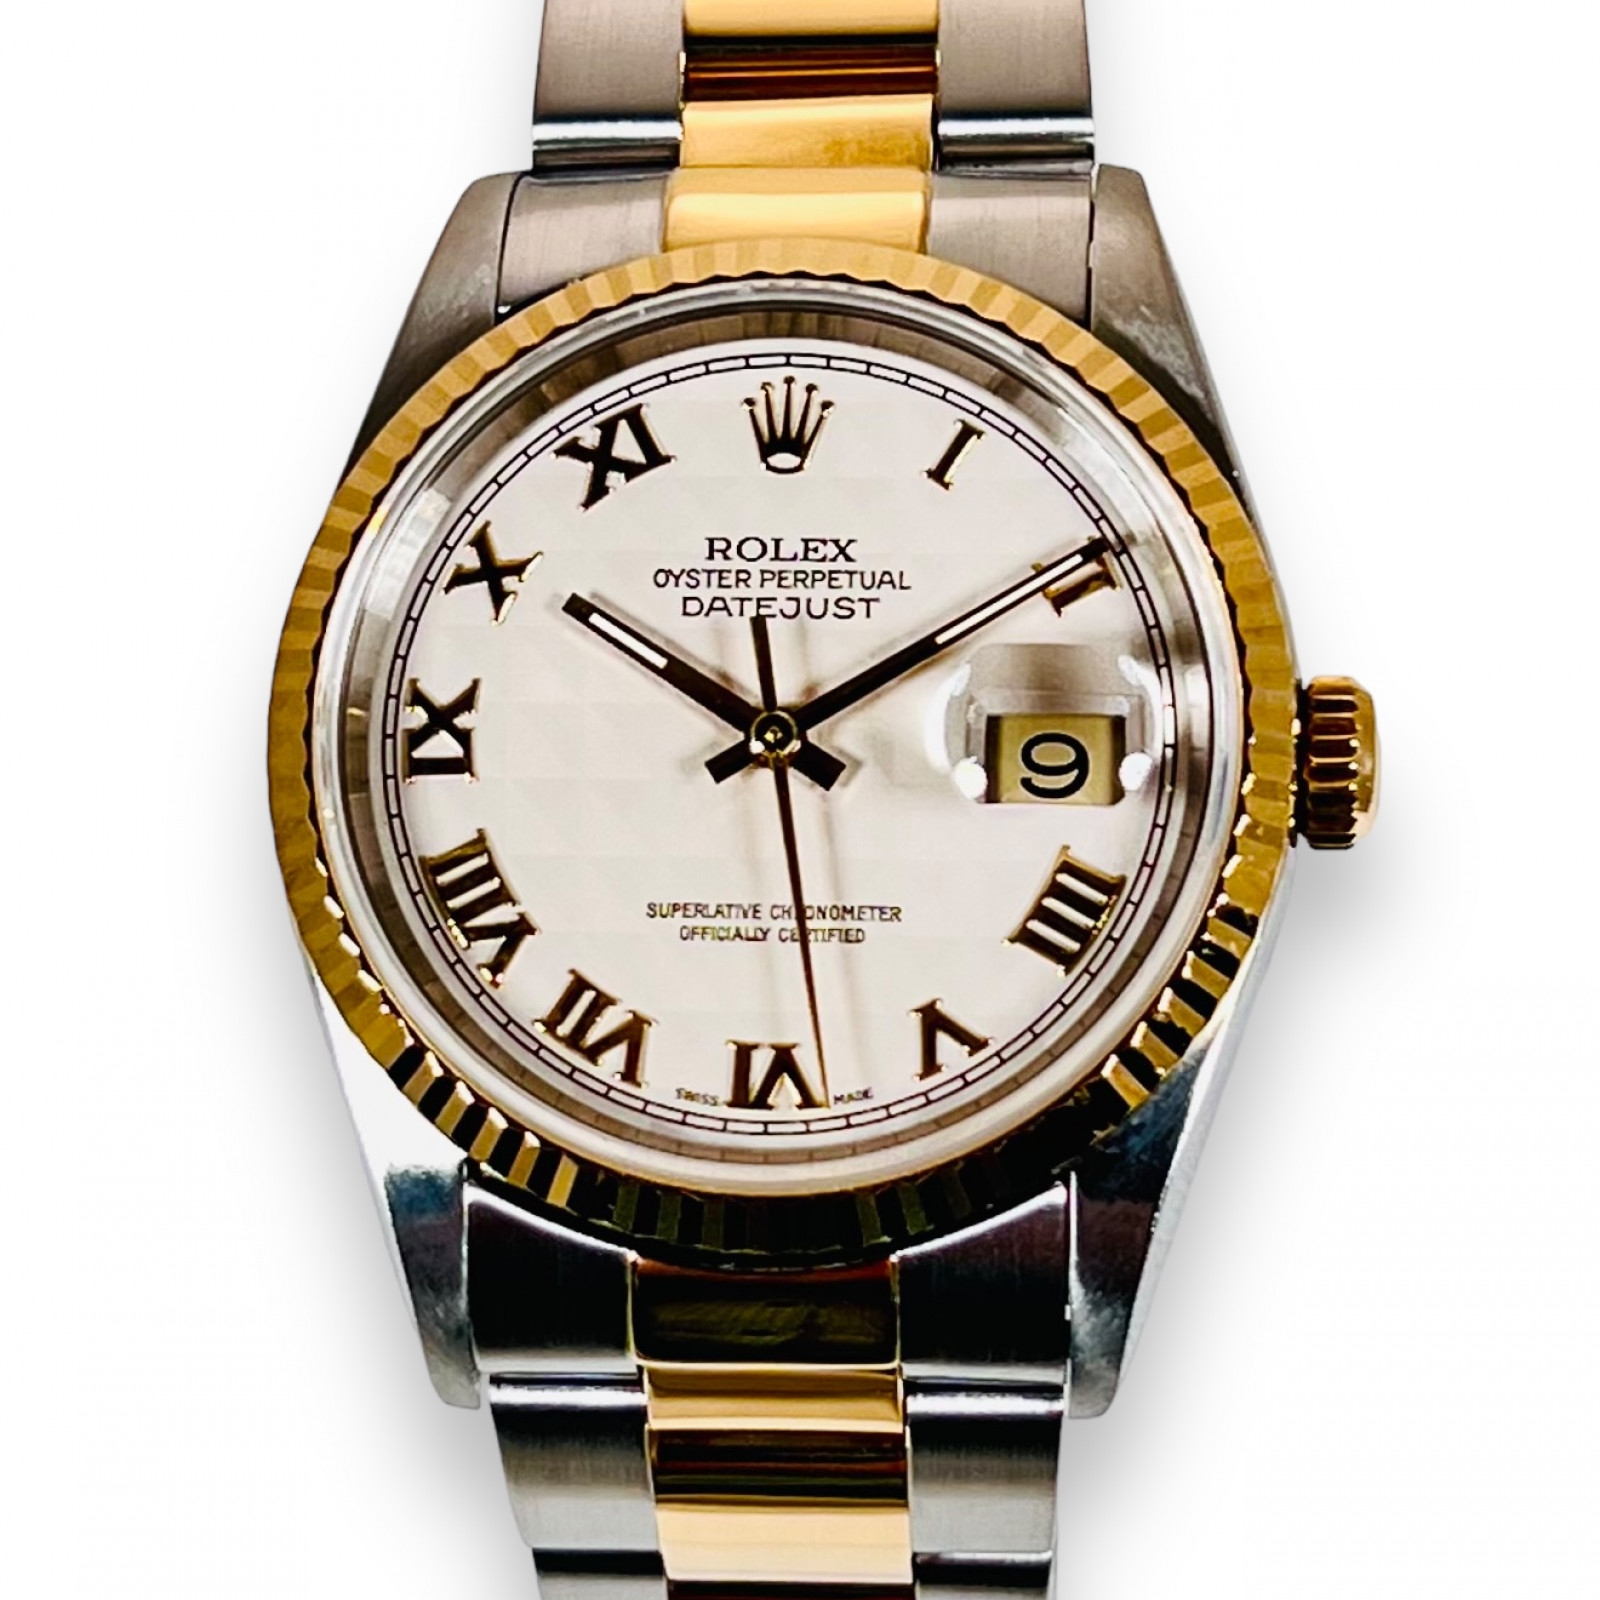 Rolex Datejust Ref. 16233 with Pyramid Dial